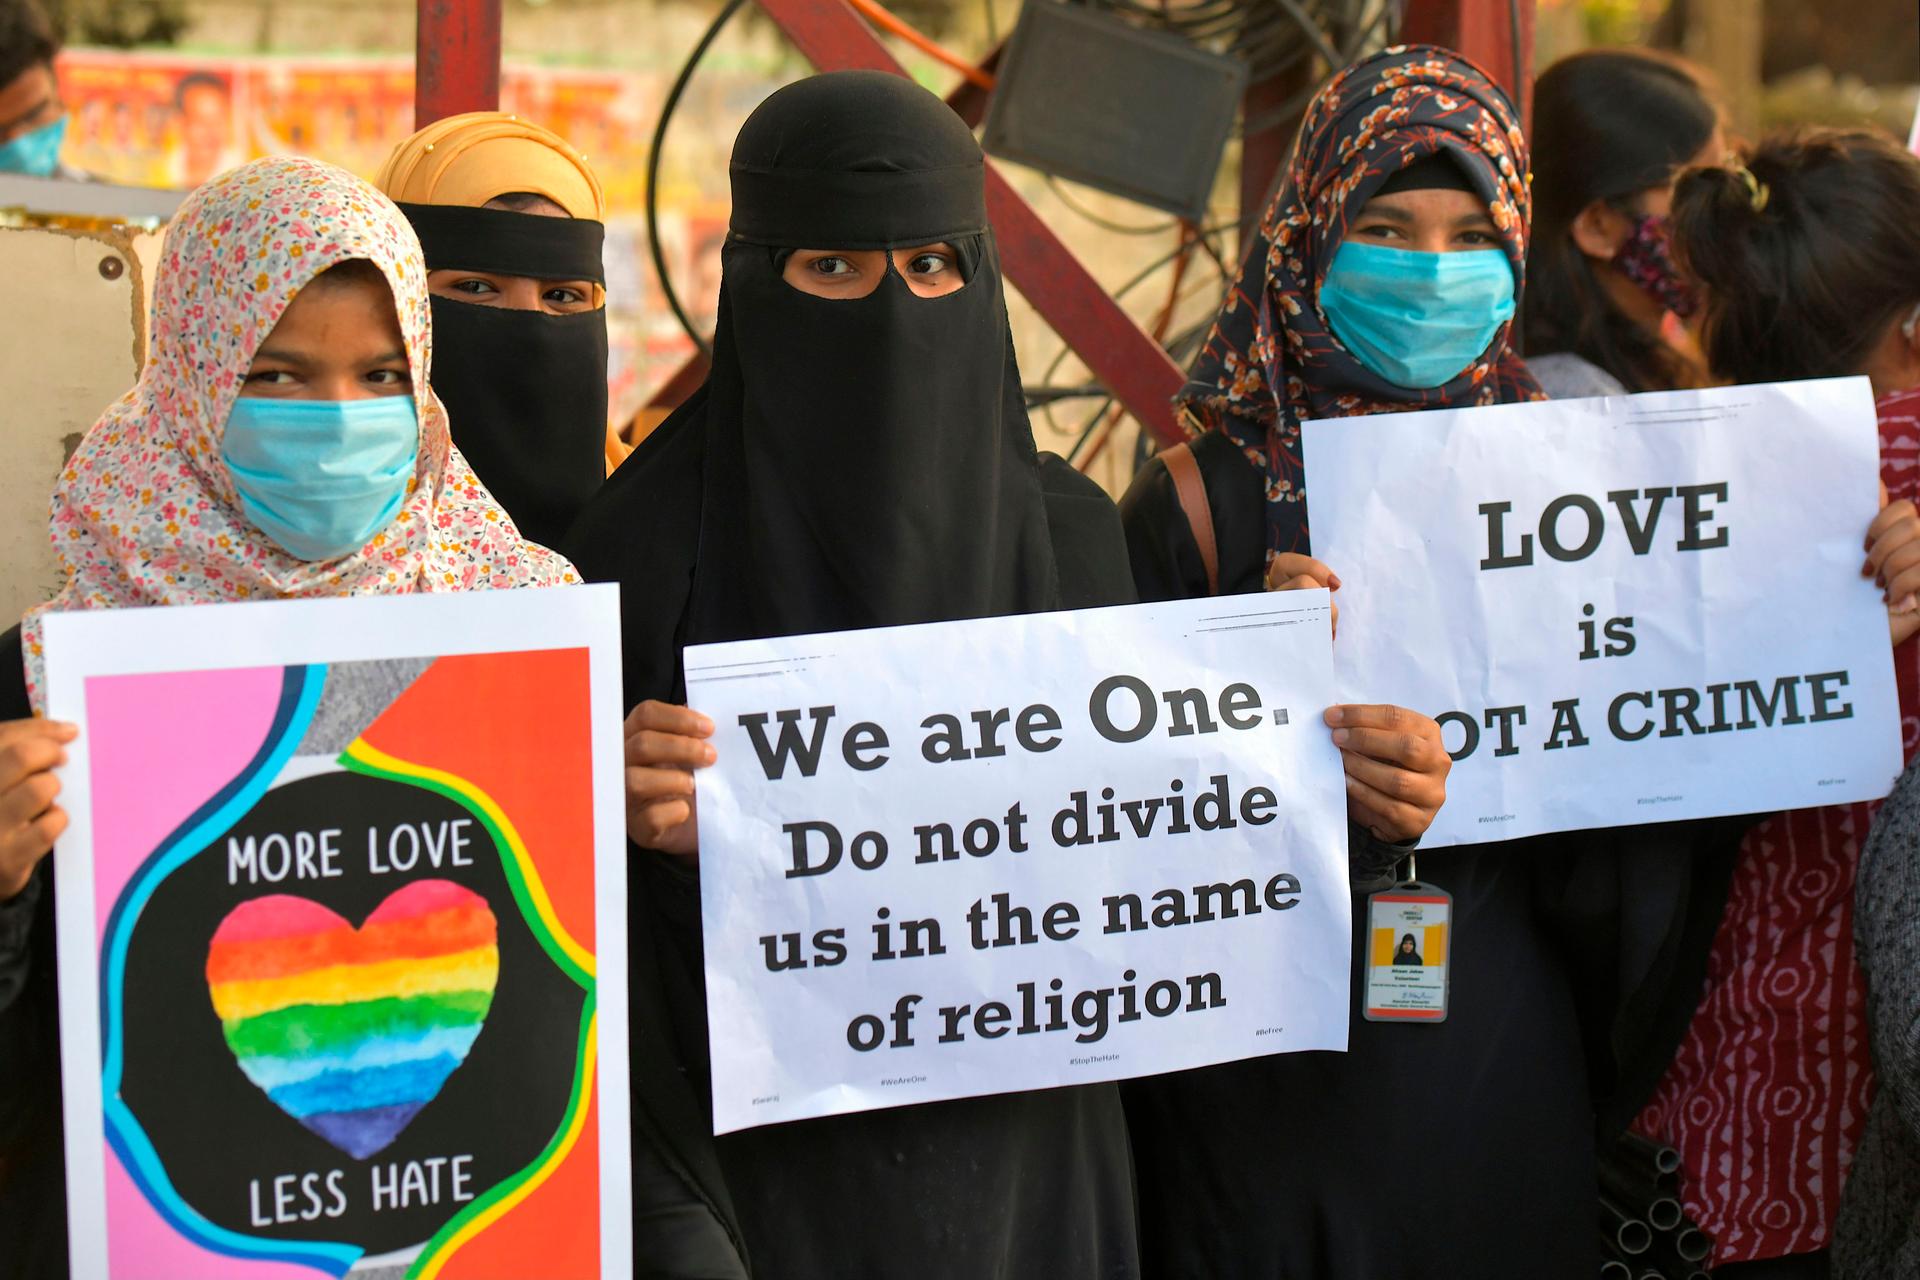 Three women protestors hold up signs reading "More Love, Less Hate"; "We are One. Do not divide us in the name of religion"; and "Love is not a crime."